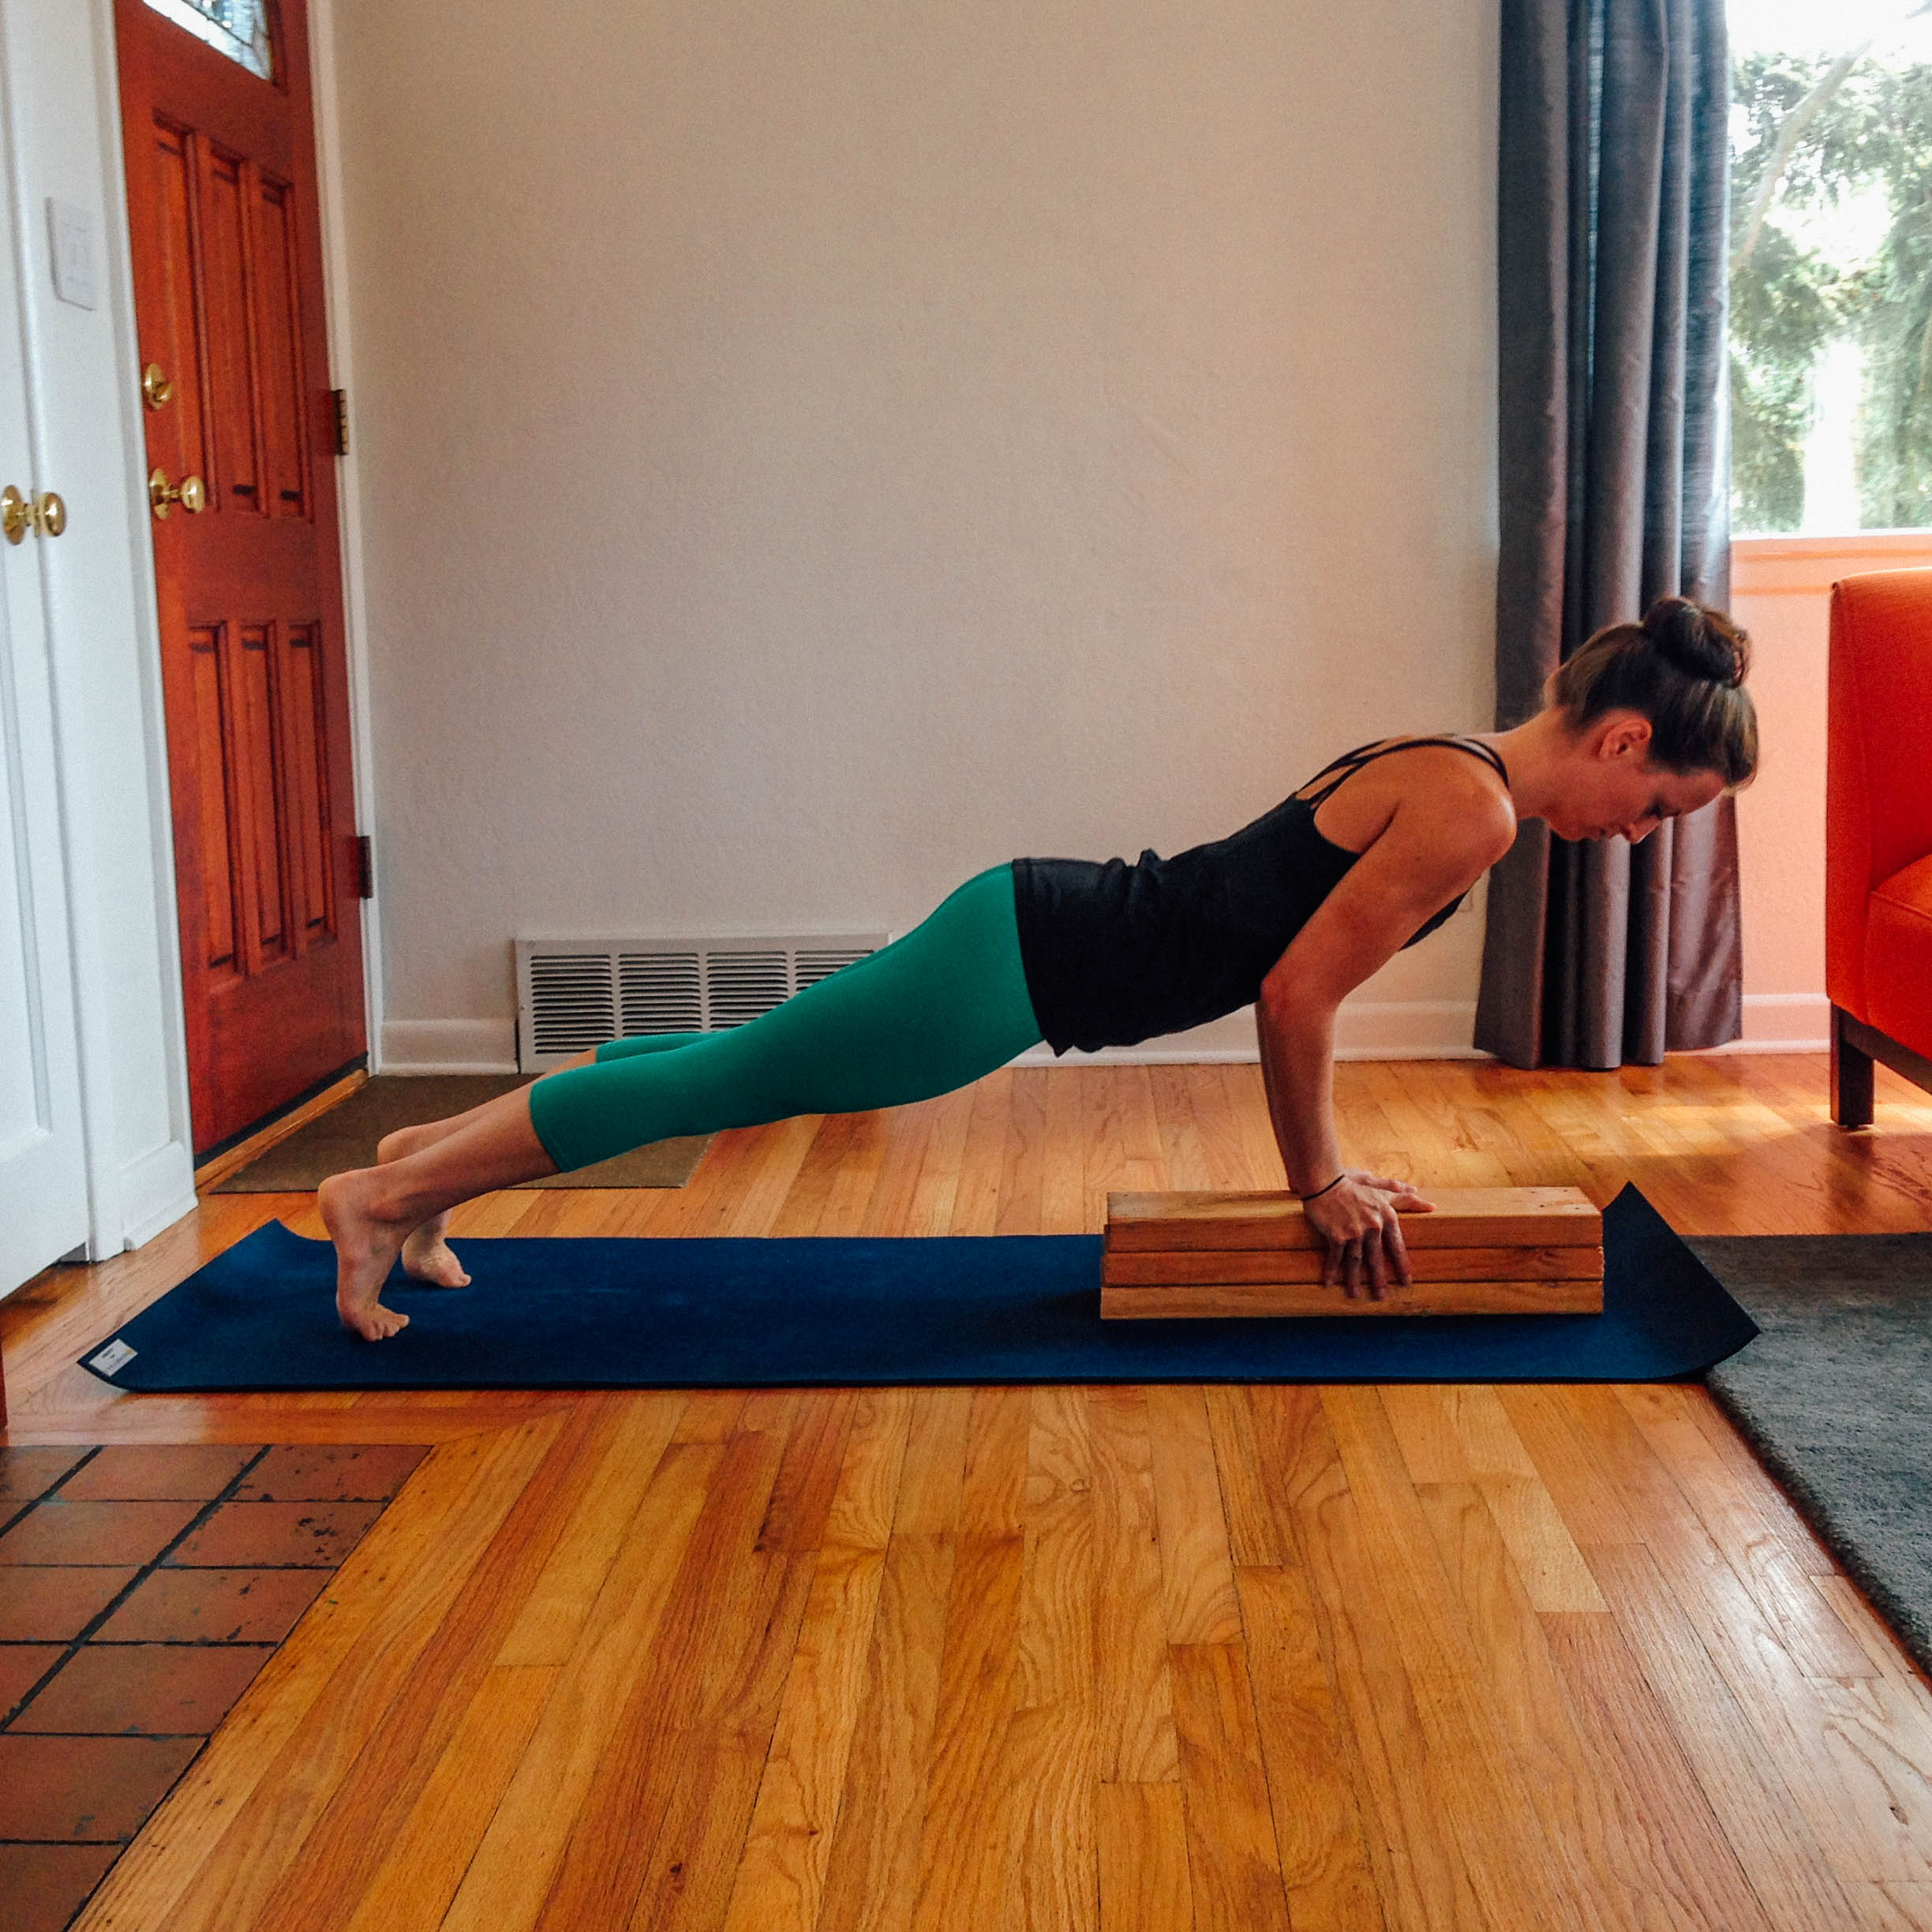 Practice These 4 Yoga Poses to Prepare for Forearm Stand